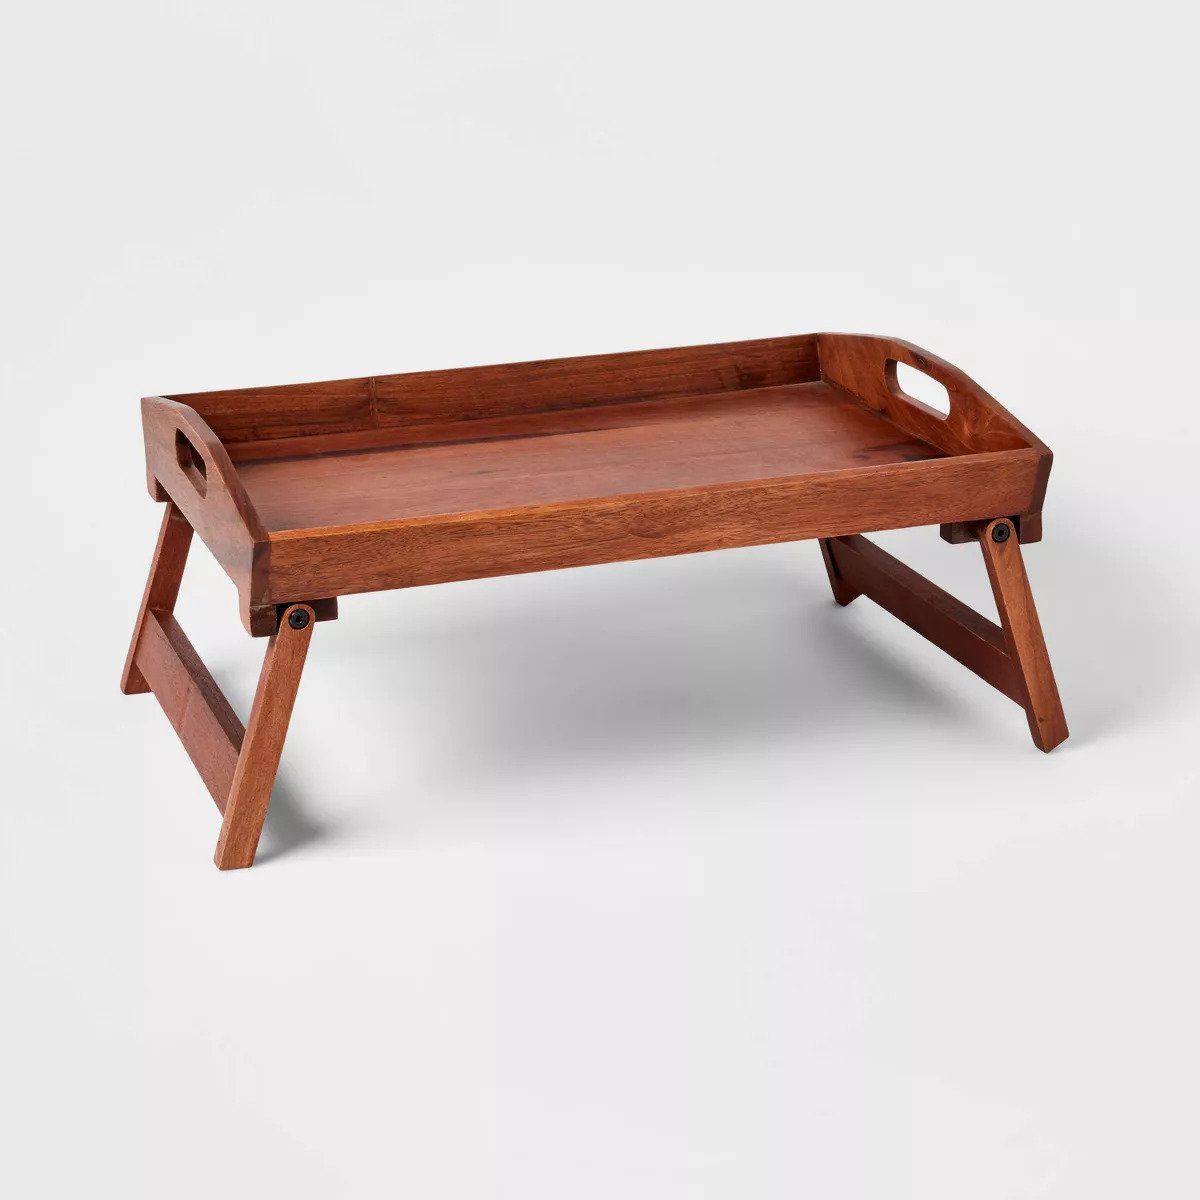 A wood bed tray.